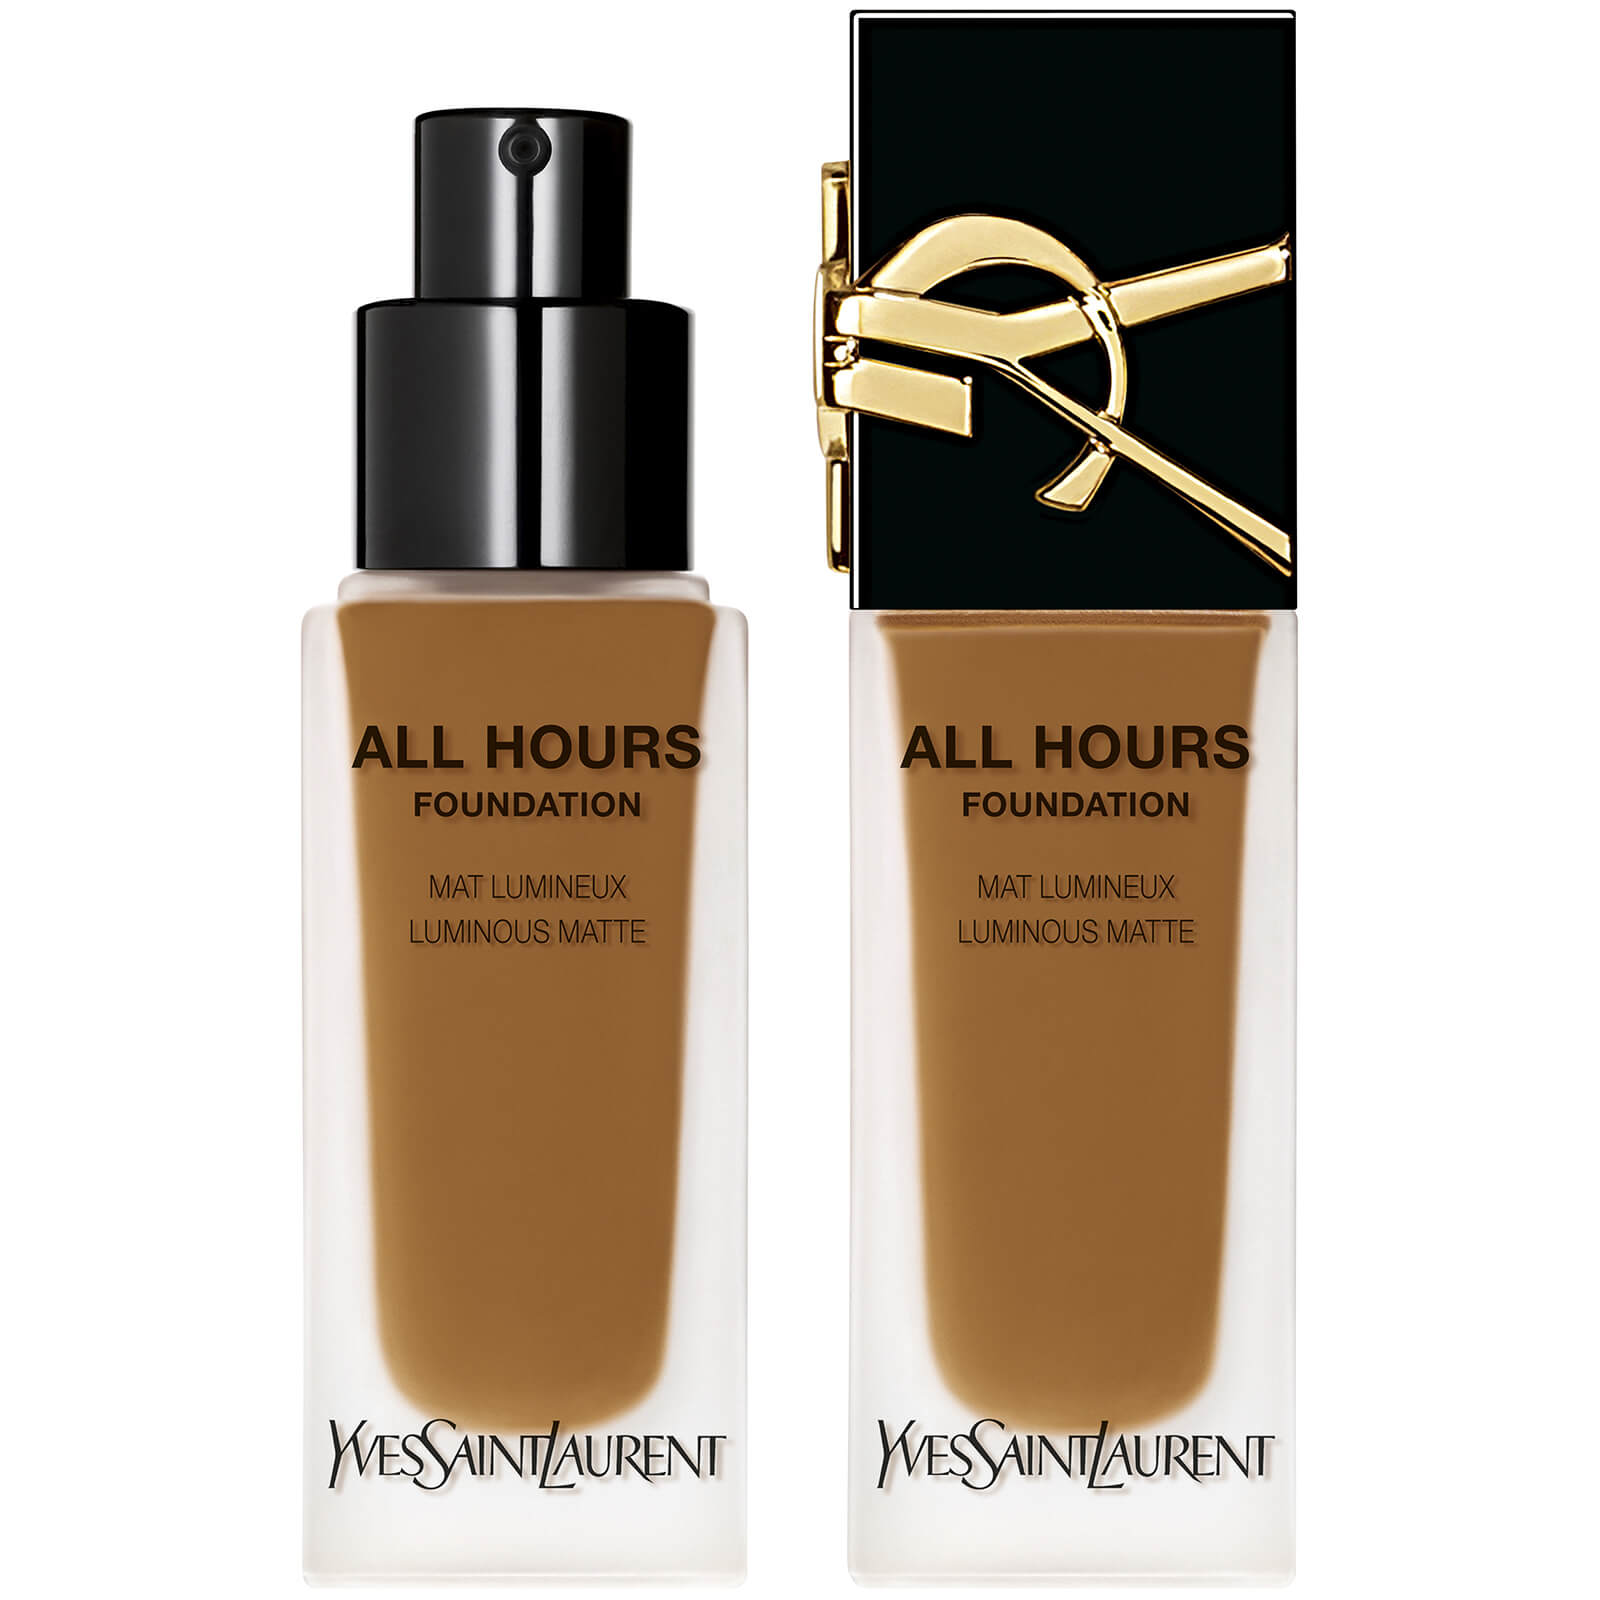 Yves Saint Laurent All Hours Luminous Matte Foundation with SPF 39 25ml (Various Shades) - DW4